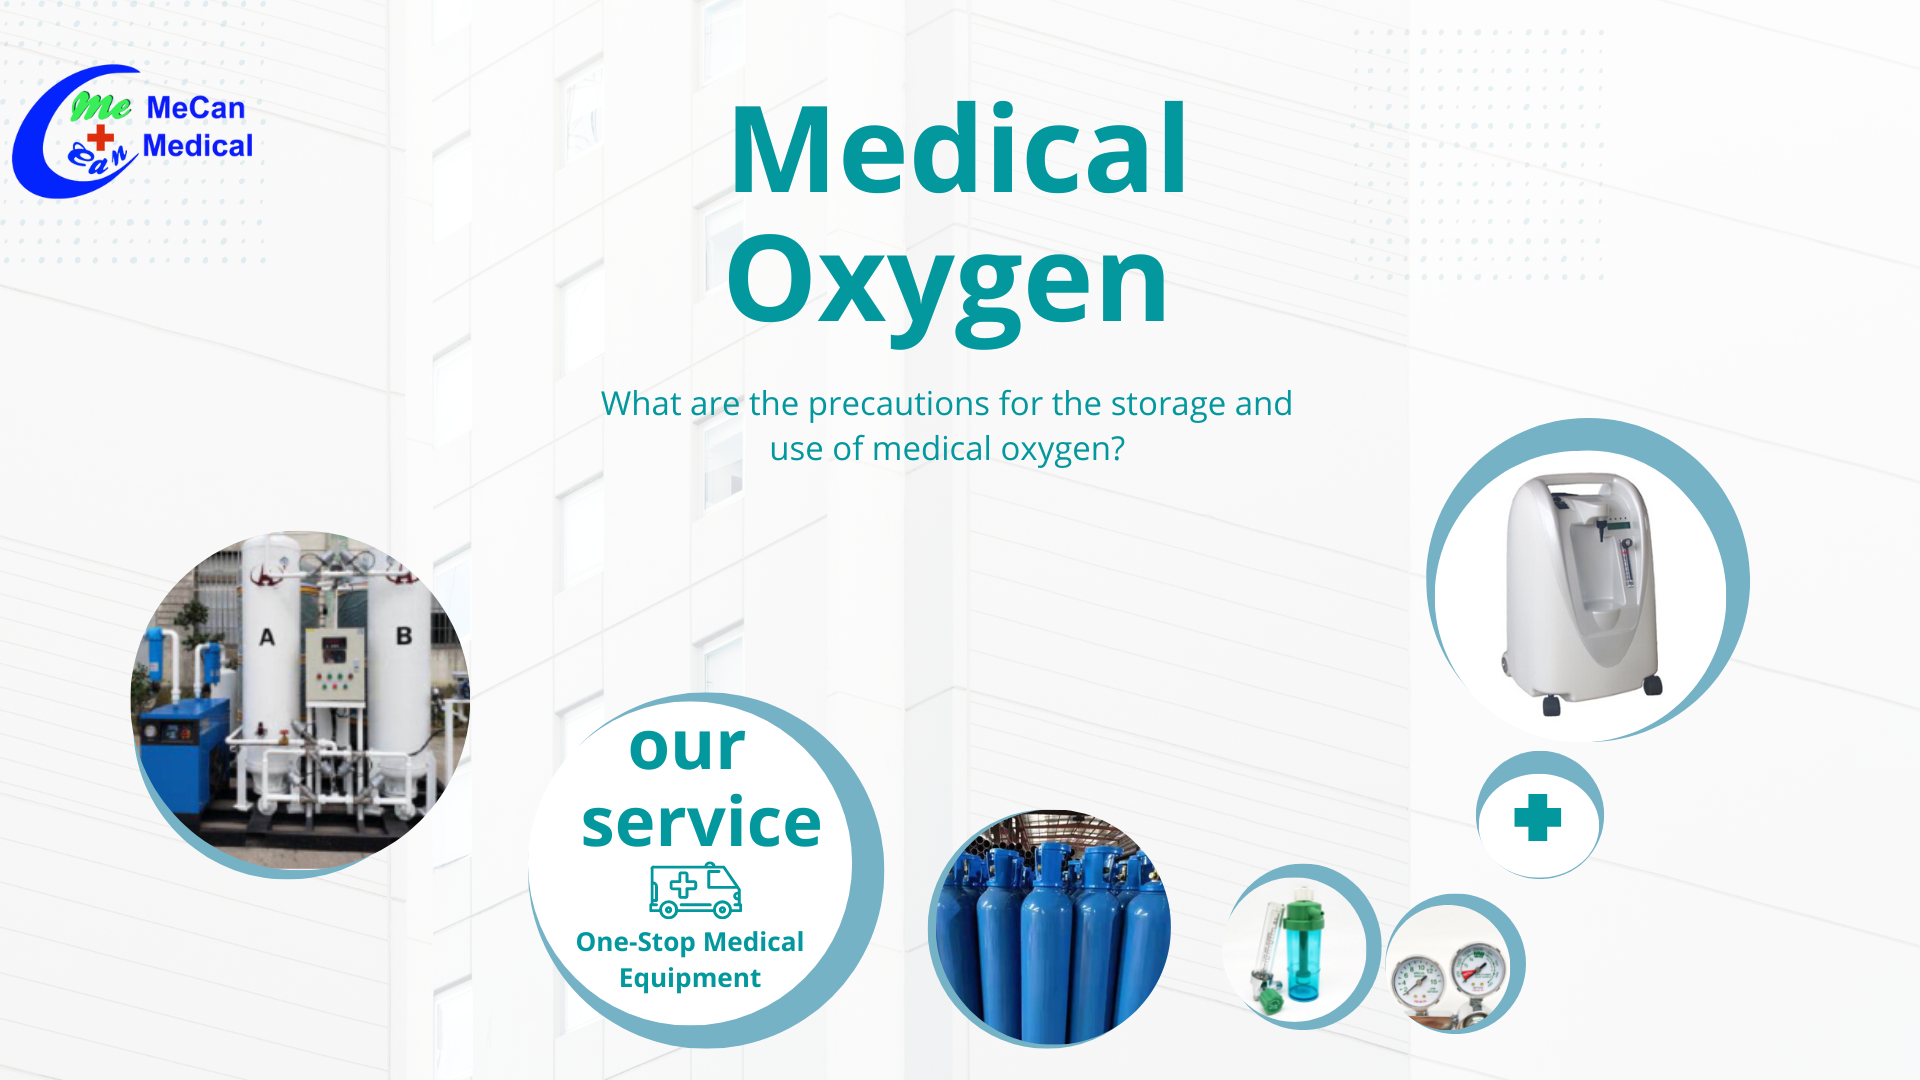 What are the precautions for the storage and use of medical oxygen?